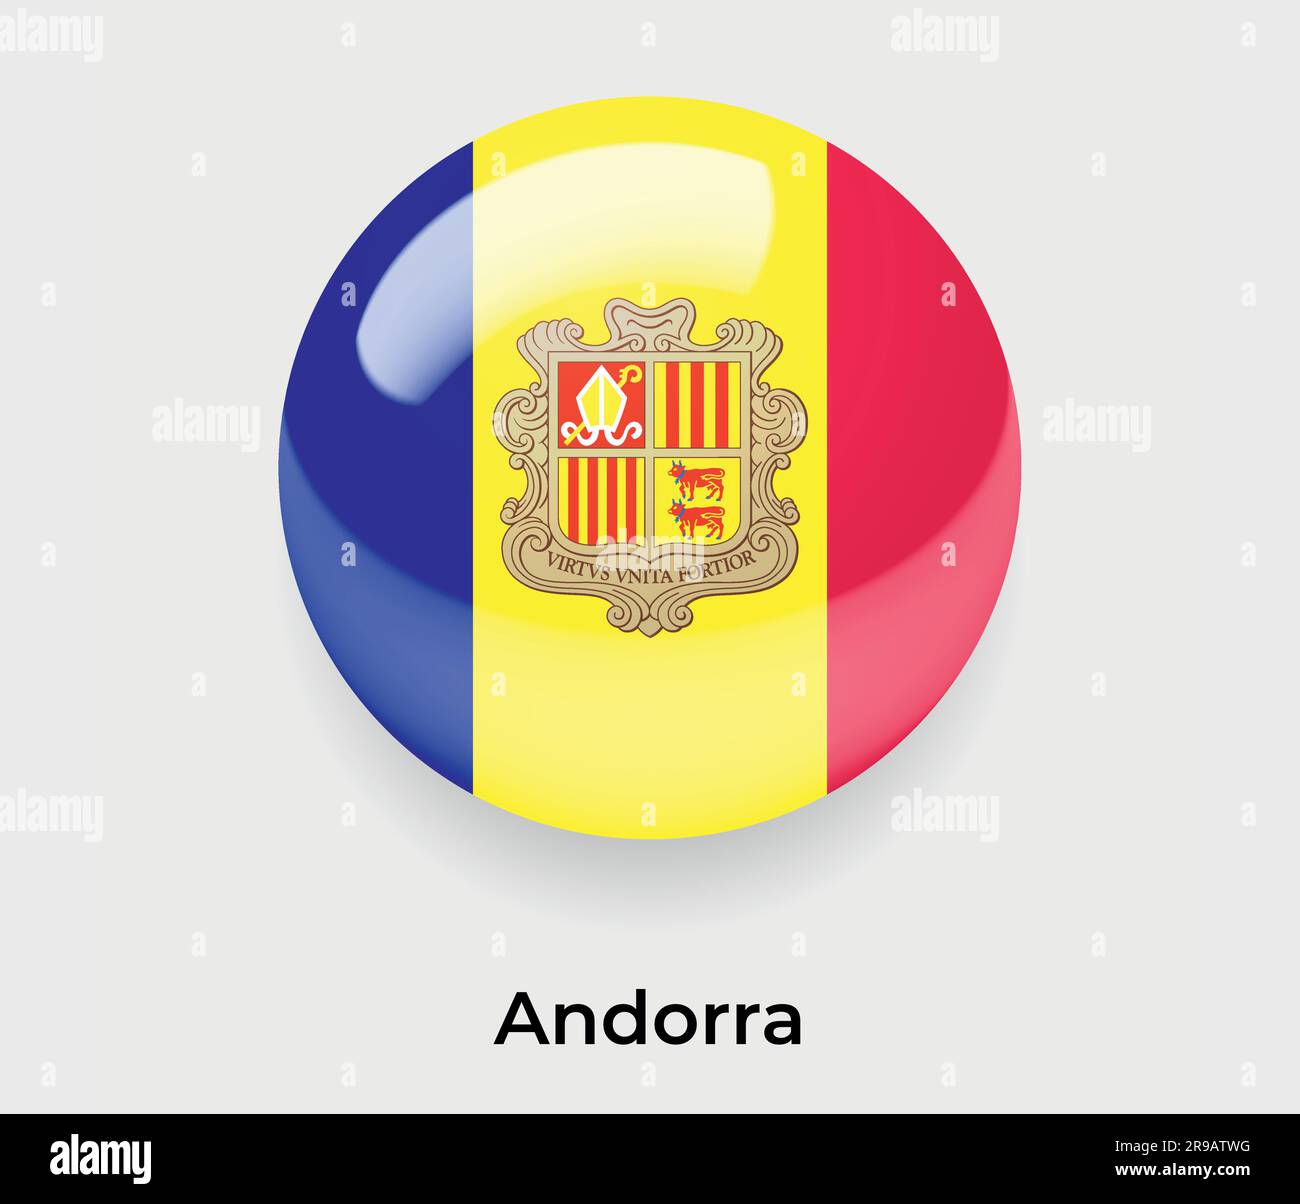 Andorra glossy flag bubble circle round shape icon vector illustration glass Stock Vector